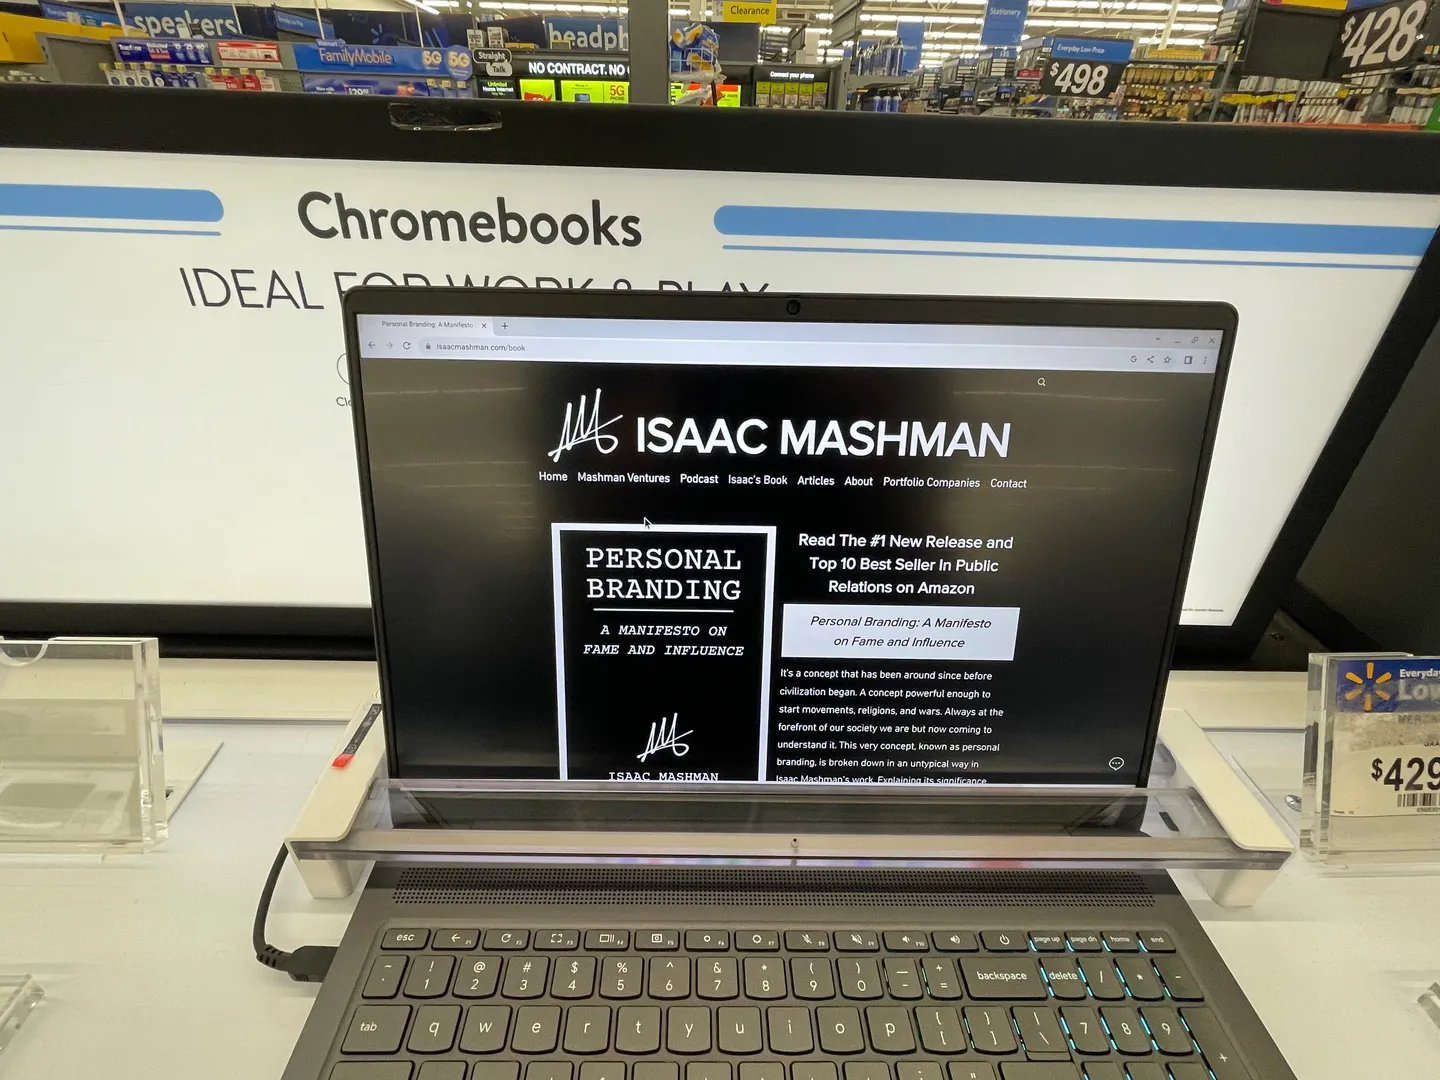 Every time I find myself in Walmart or a store that has laptops or cellphones on display, I will load up my website Isaacmashman.com so the next person who walks up will see my name and what I have going on. 

Is it effective? Maybe. Maybe not. 

I do this as a reminder of how AGGRESSIVE I have to take my marketing and personal brand to achieve results. 

I recommend you do the same ♦️